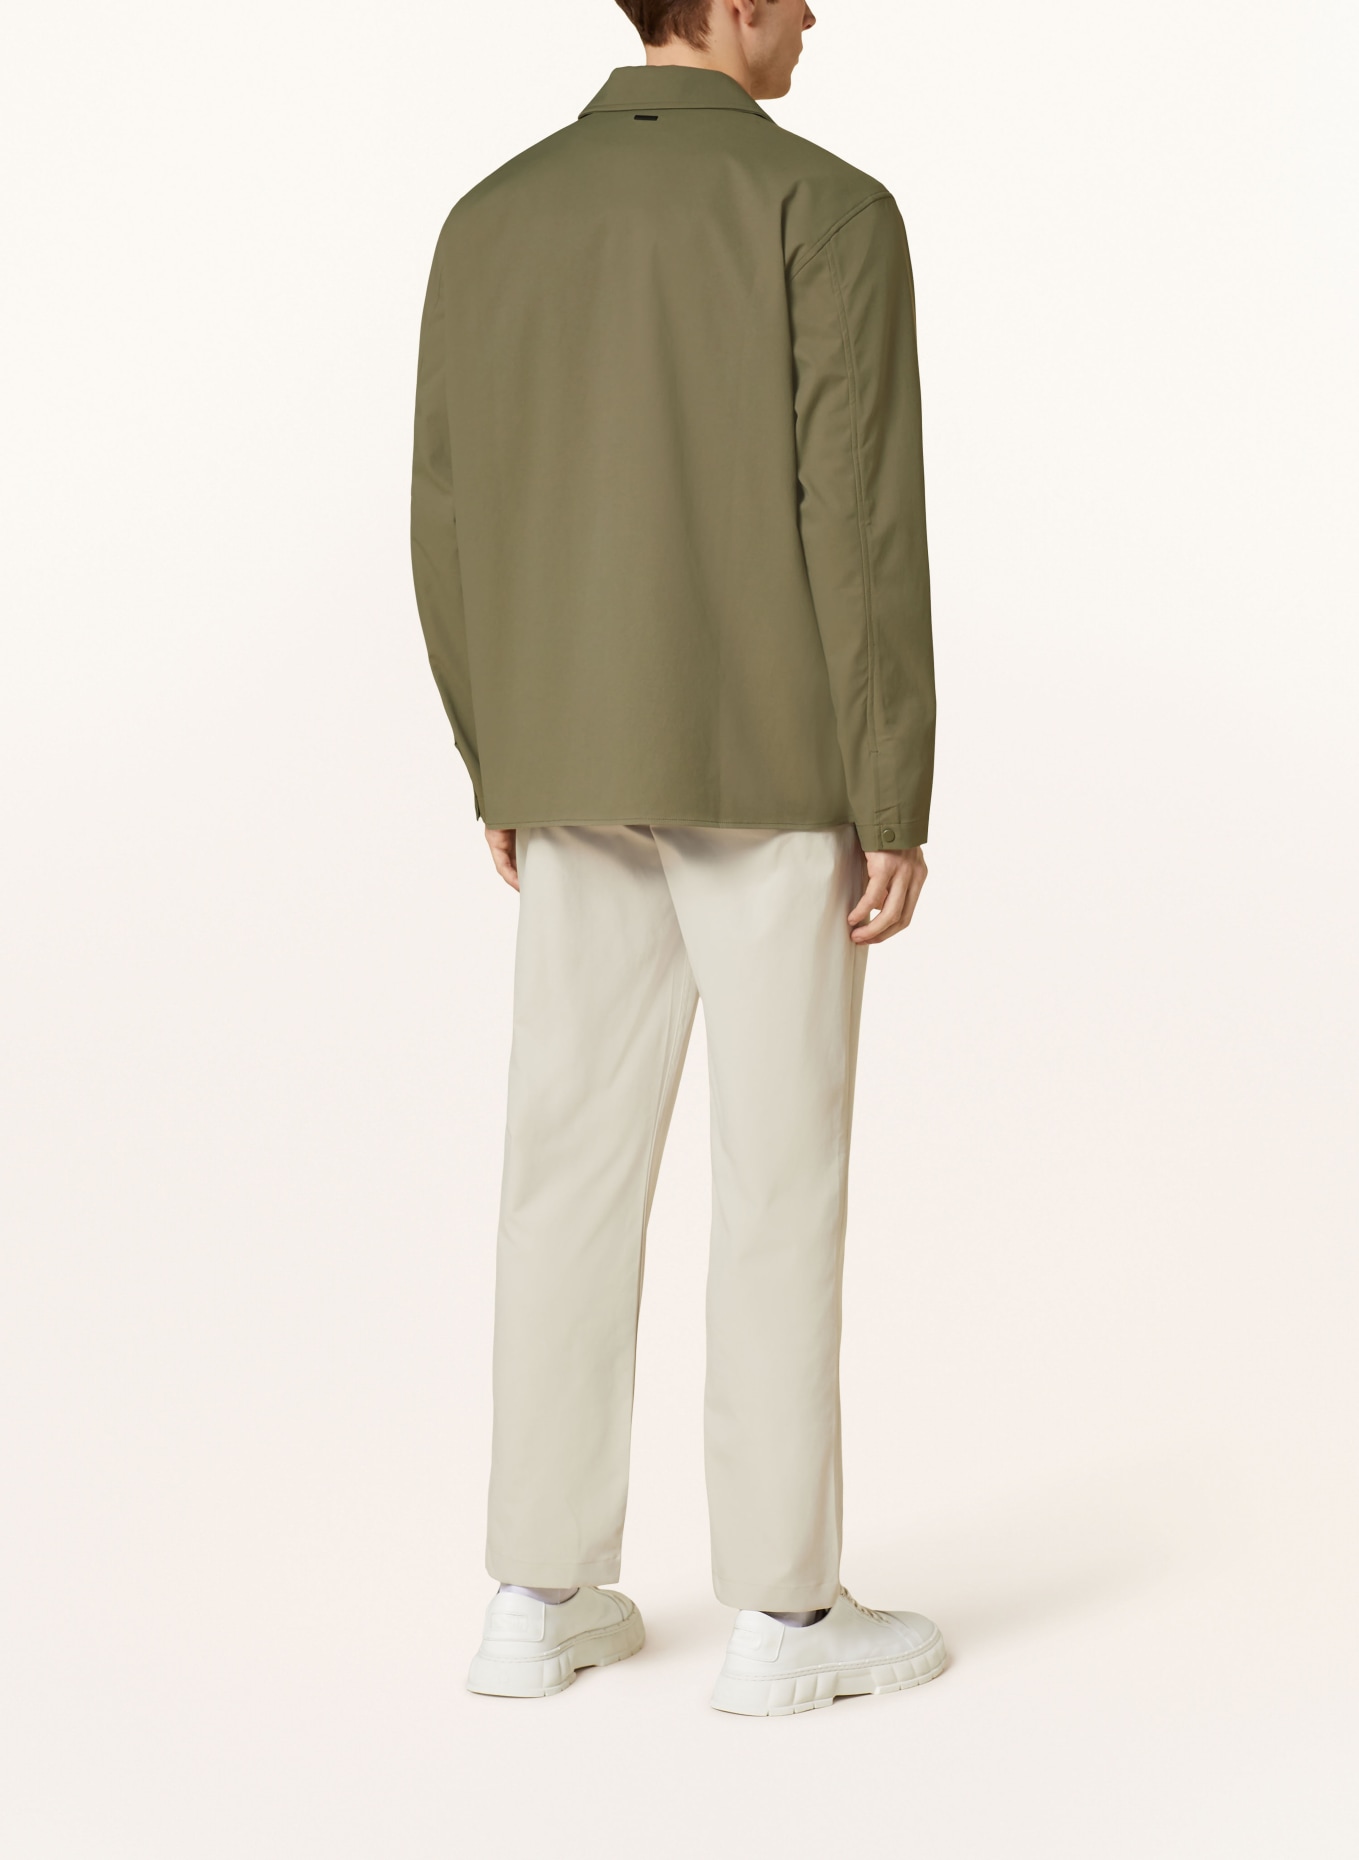 NORSE PROJECTS Overshirt CARSTEN, Farbe: OLIV (Bild 3)